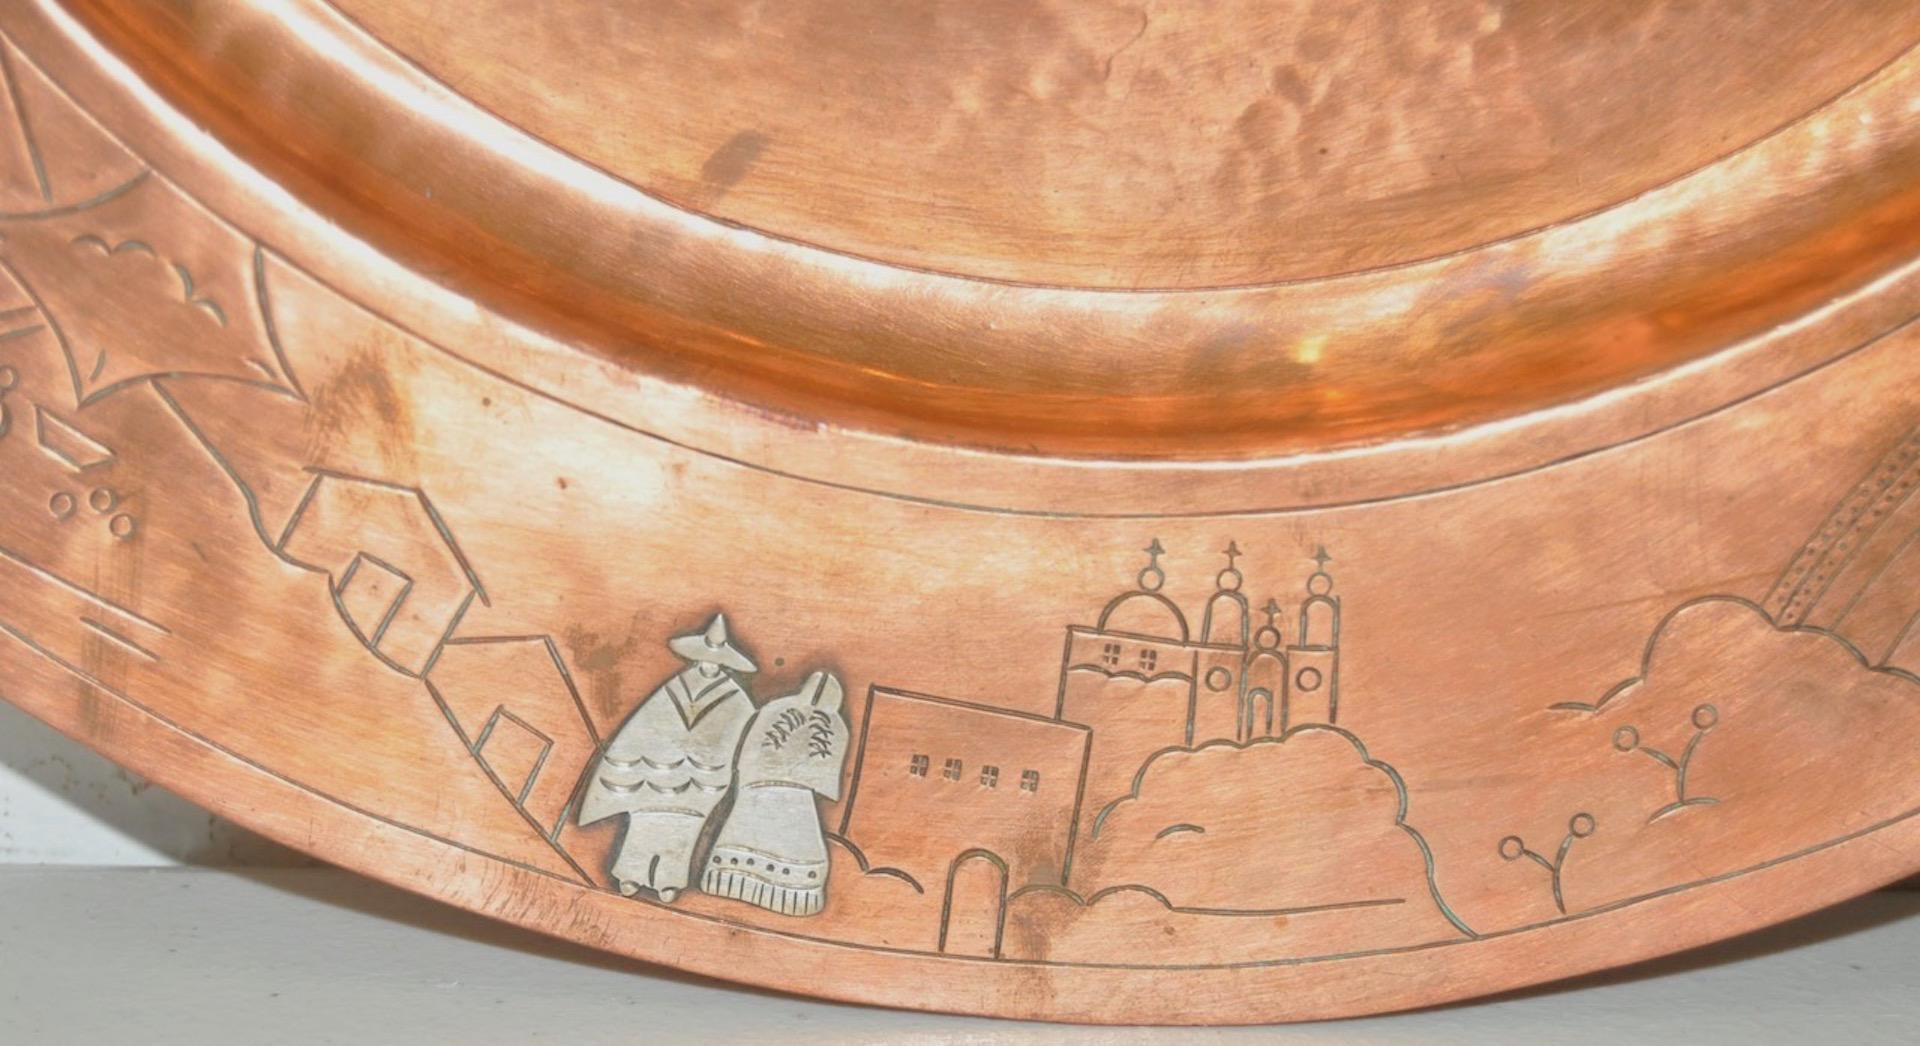 Midcentury copper platter with sterling, circa 1950s

Fantastic copper platter surrounded with sterling donkey, bull fighter, farm worker, and various figures.

The platter is stamped with the hallmarks 